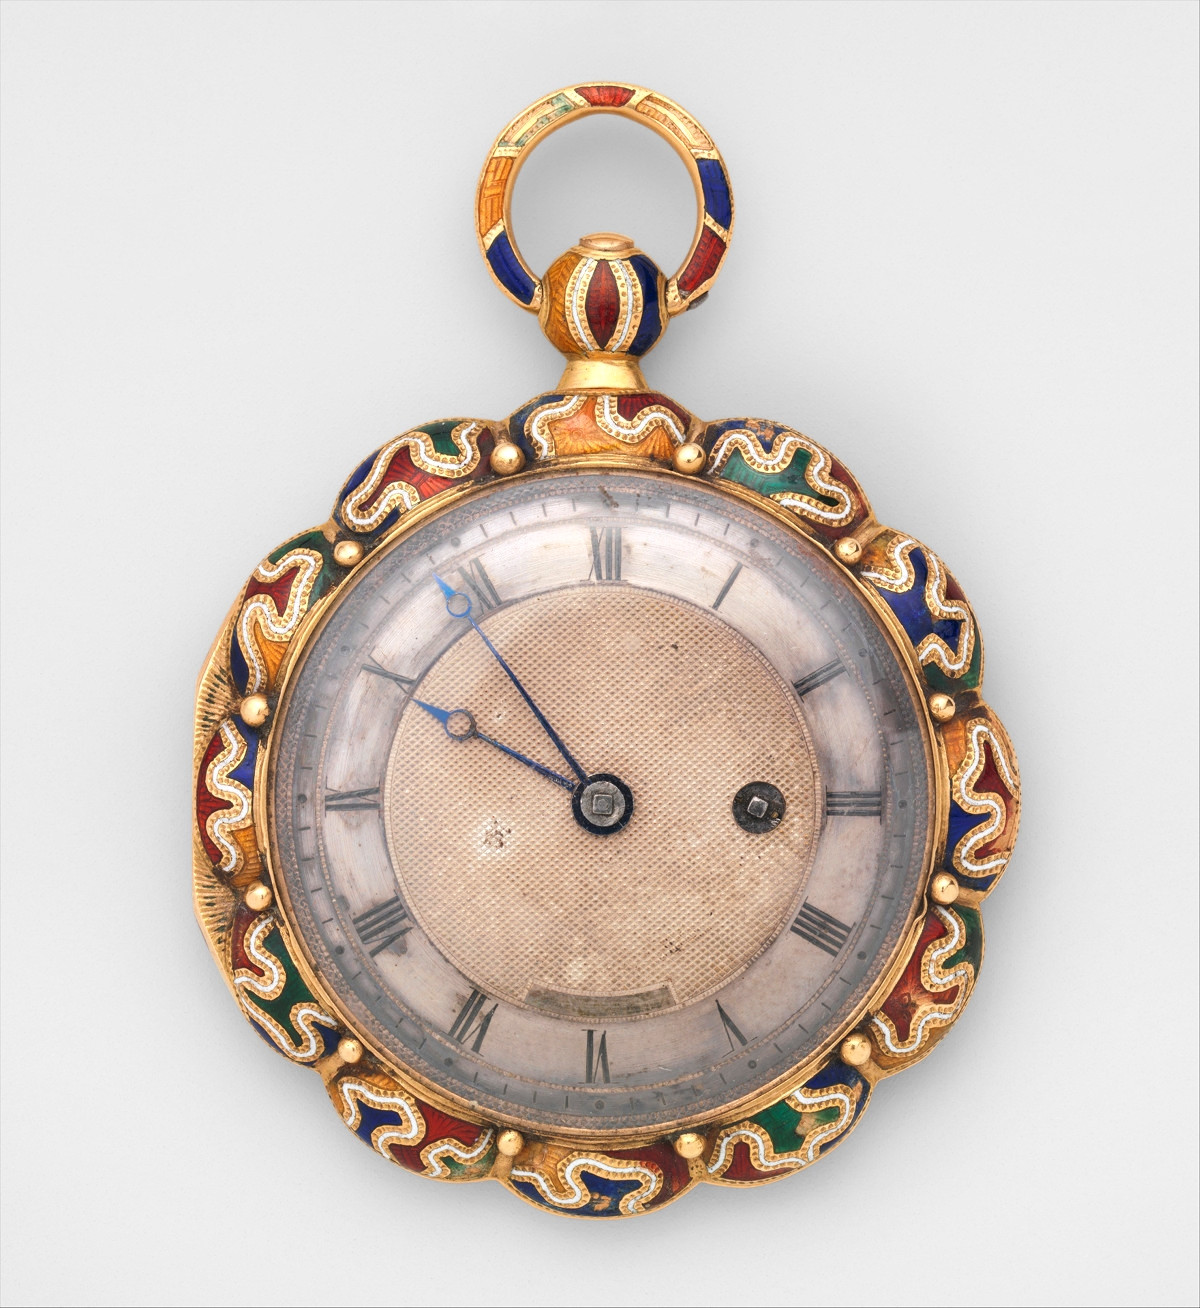 1825. Watch. Swiss, Geneva. Case of gold and enamel; jeweled movement, with cylinder escapement. metmuseum